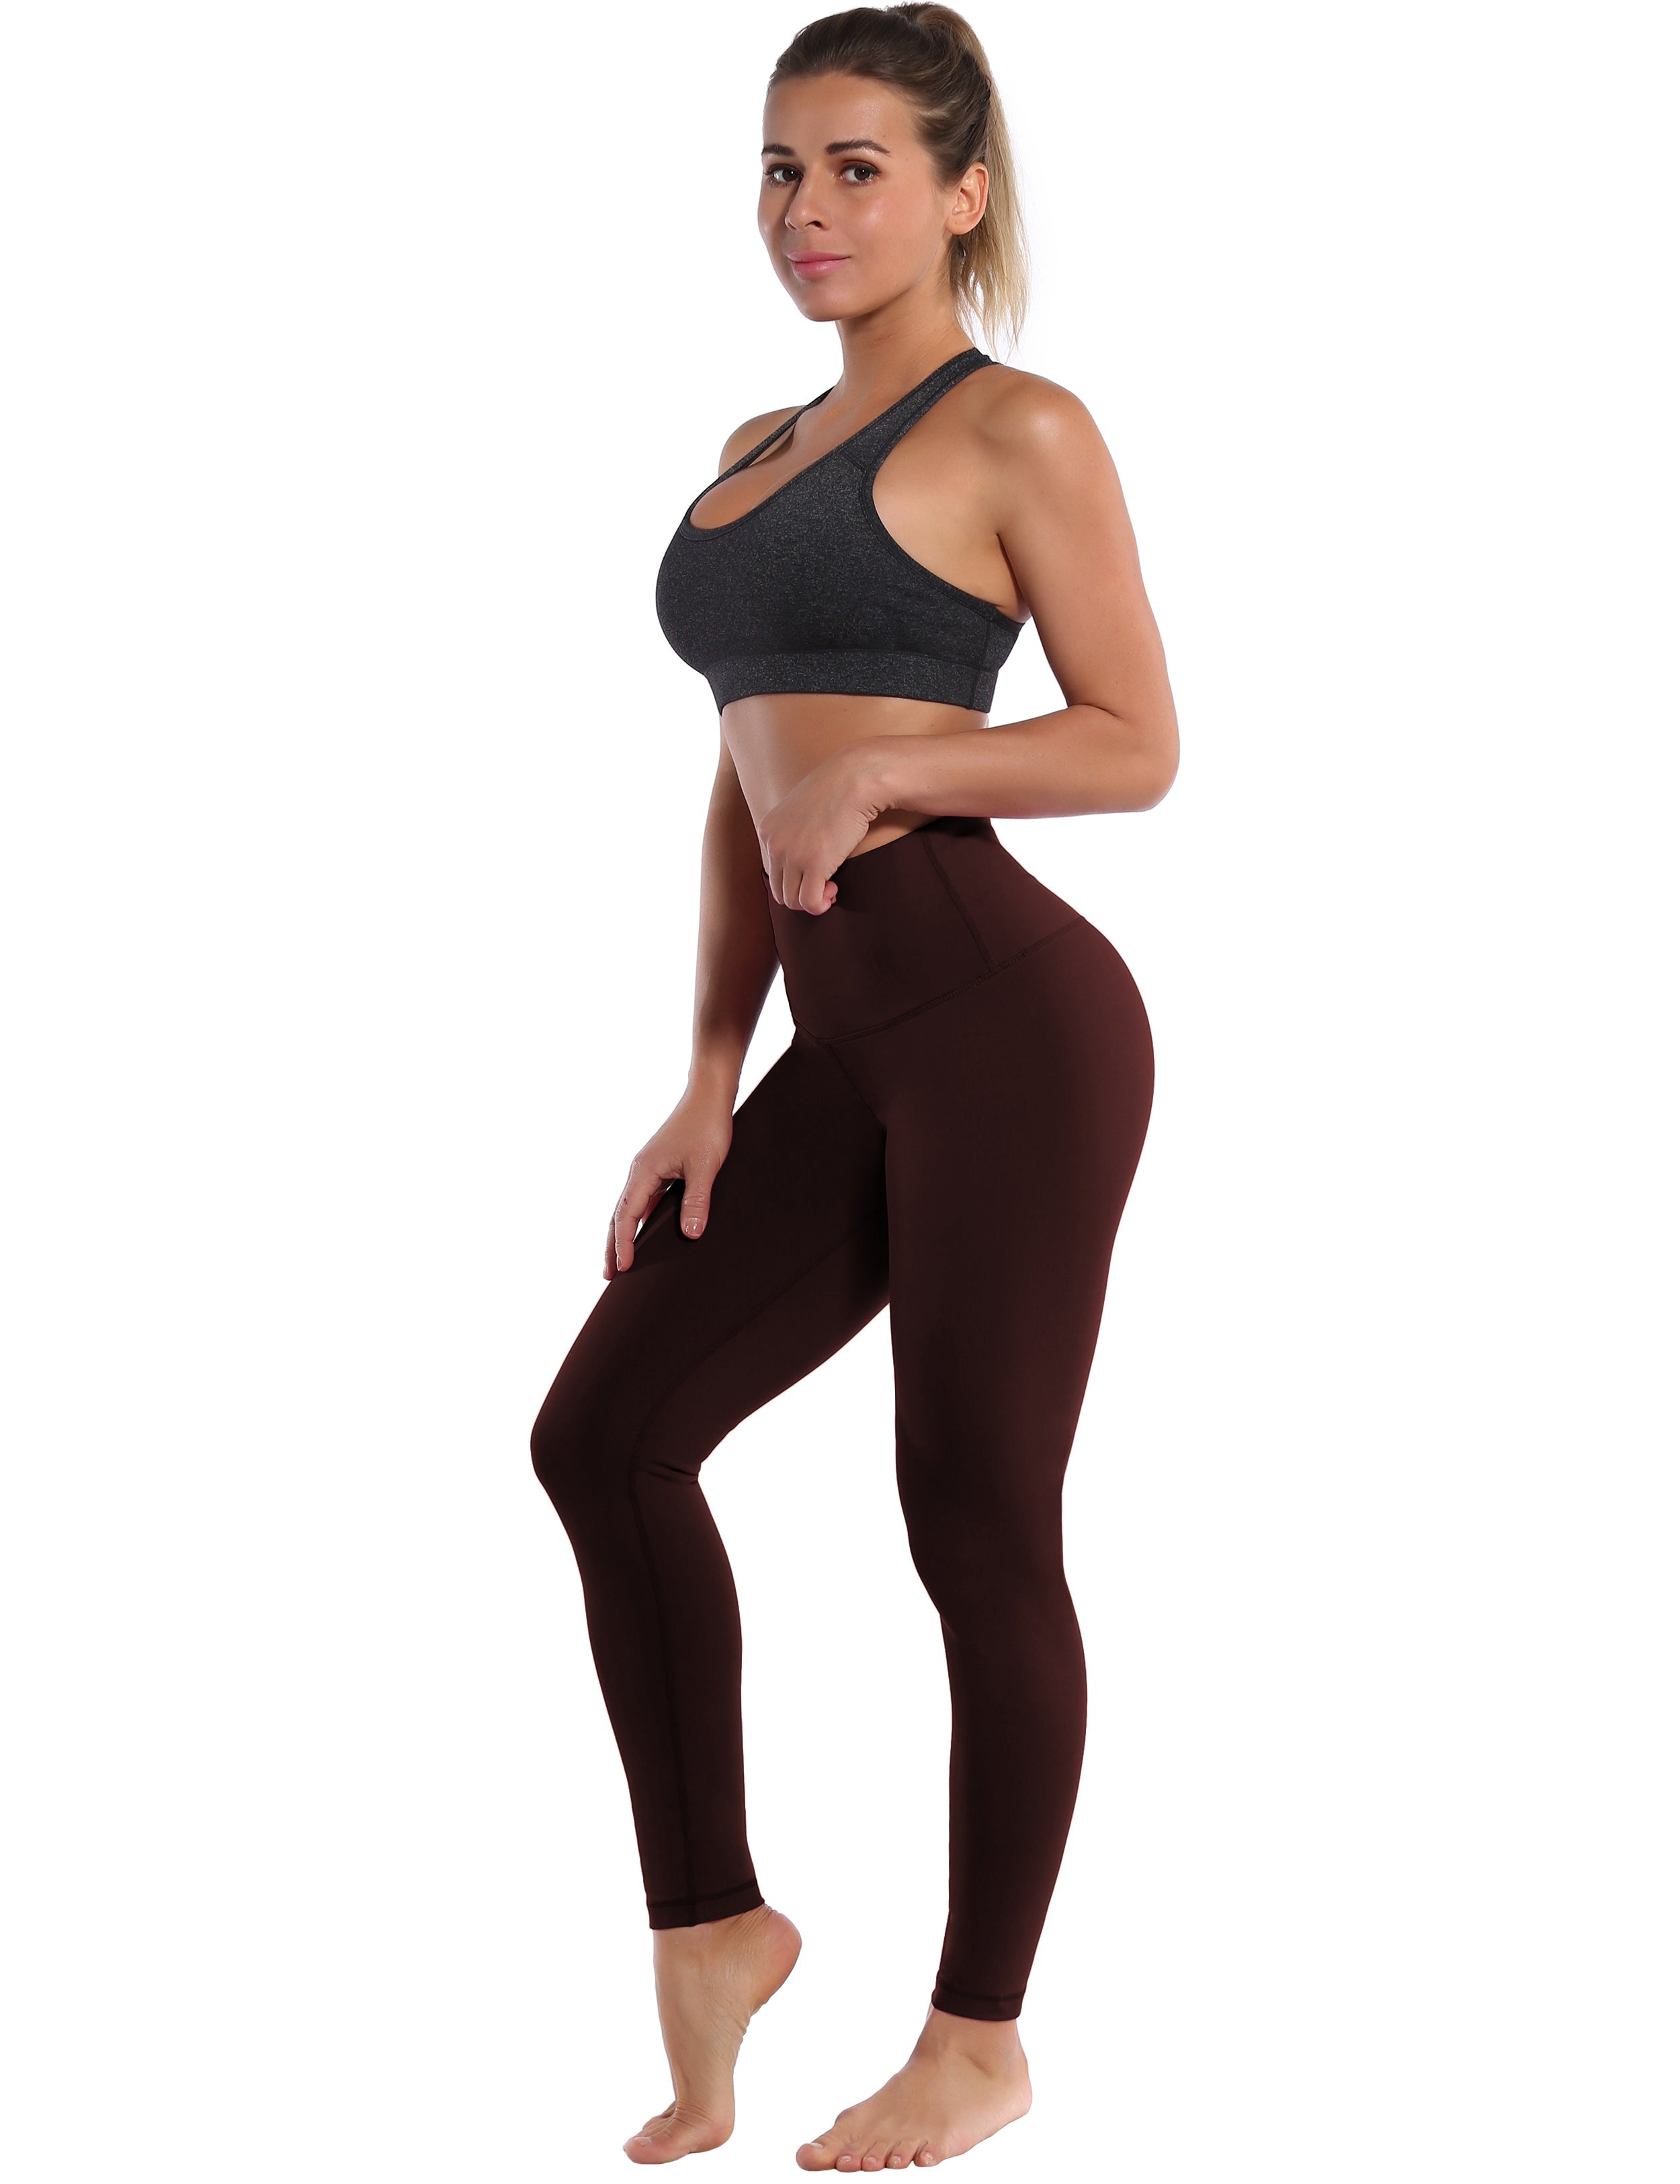 High Waist Golf Pants mahoganymaroon 75%Nylon/25%Spandex Fabric doesn't attract lint easily 4-way stretch No see-through Moisture-wicking Tummy control Inner pocket Four lengths